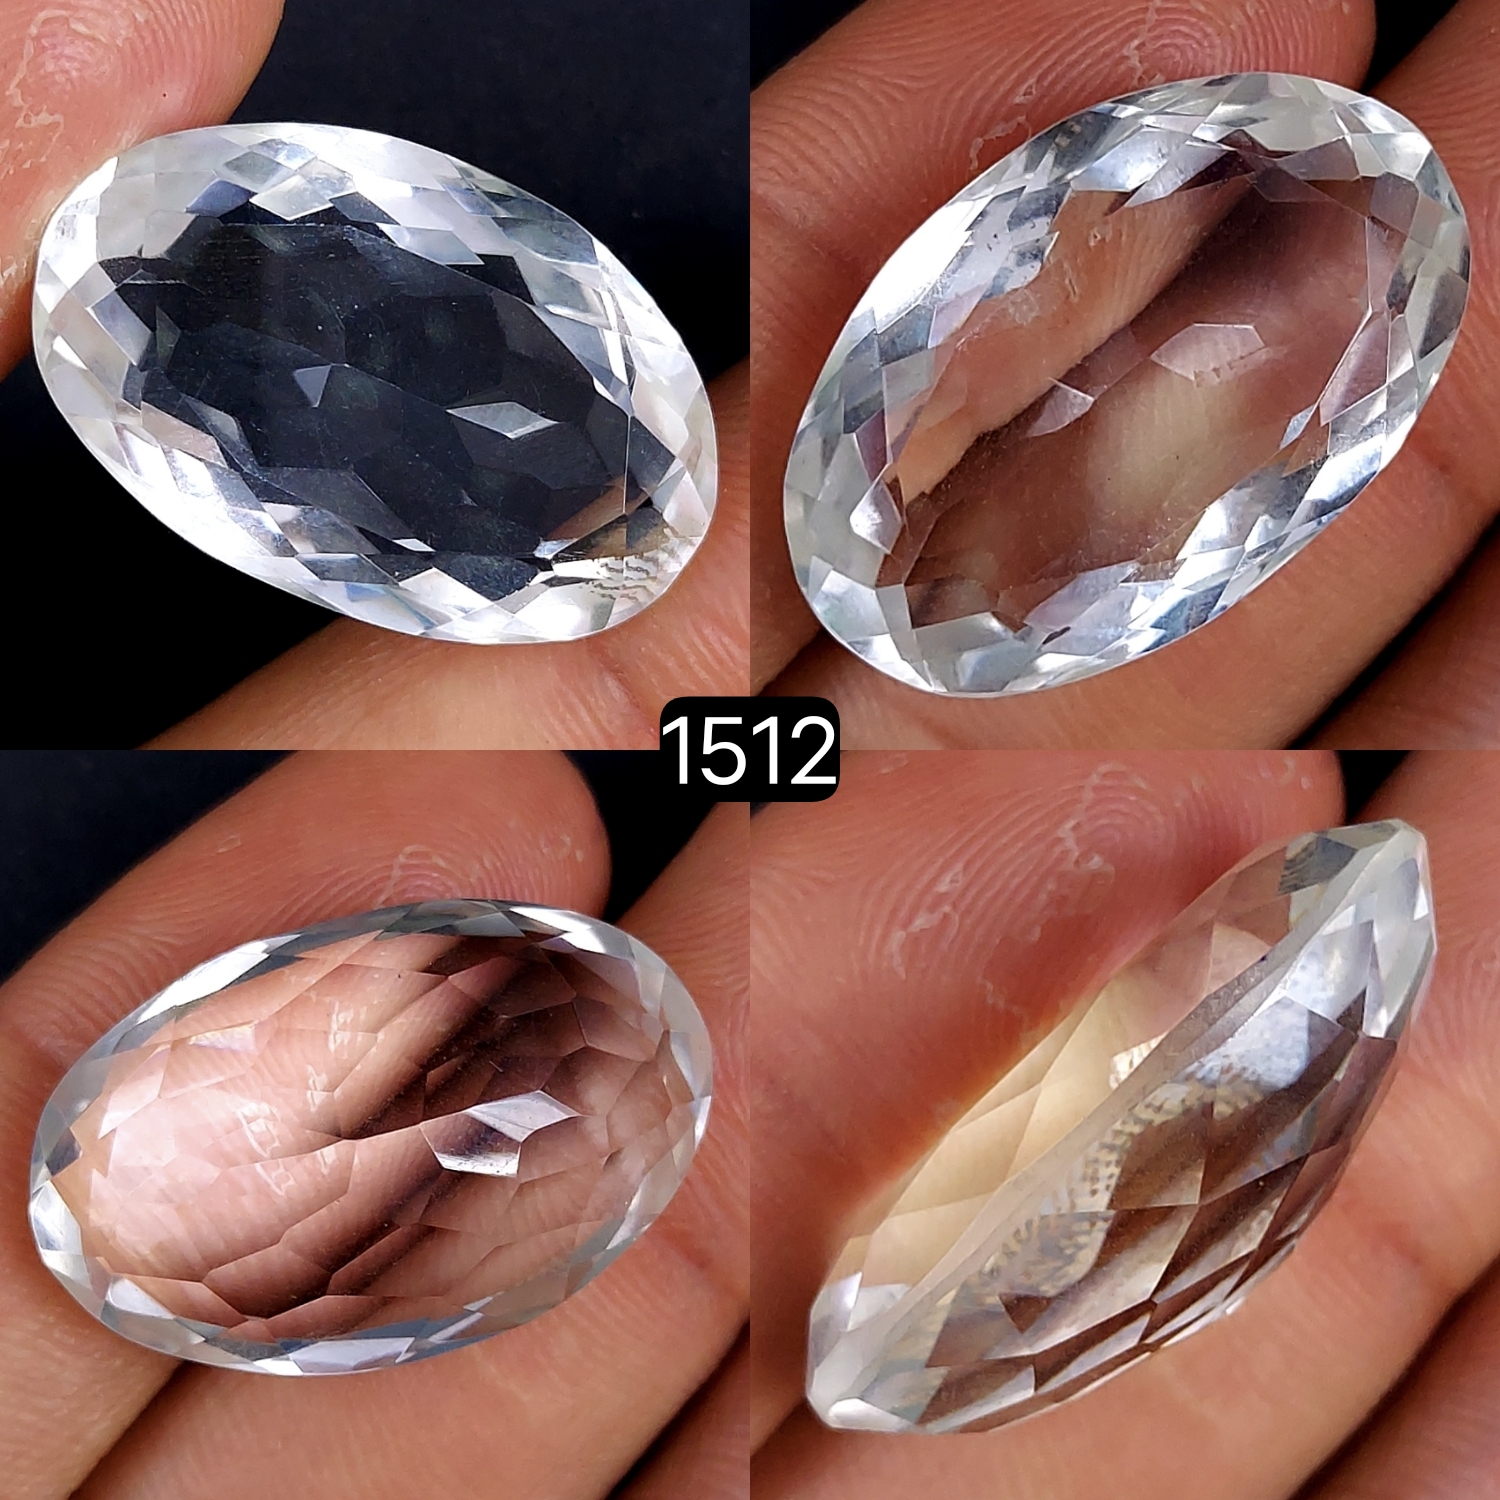 1Pcs 38Cts Natural Crystal Quartz Faceted Oval Shape Loose Gemstone27x17mm#1512